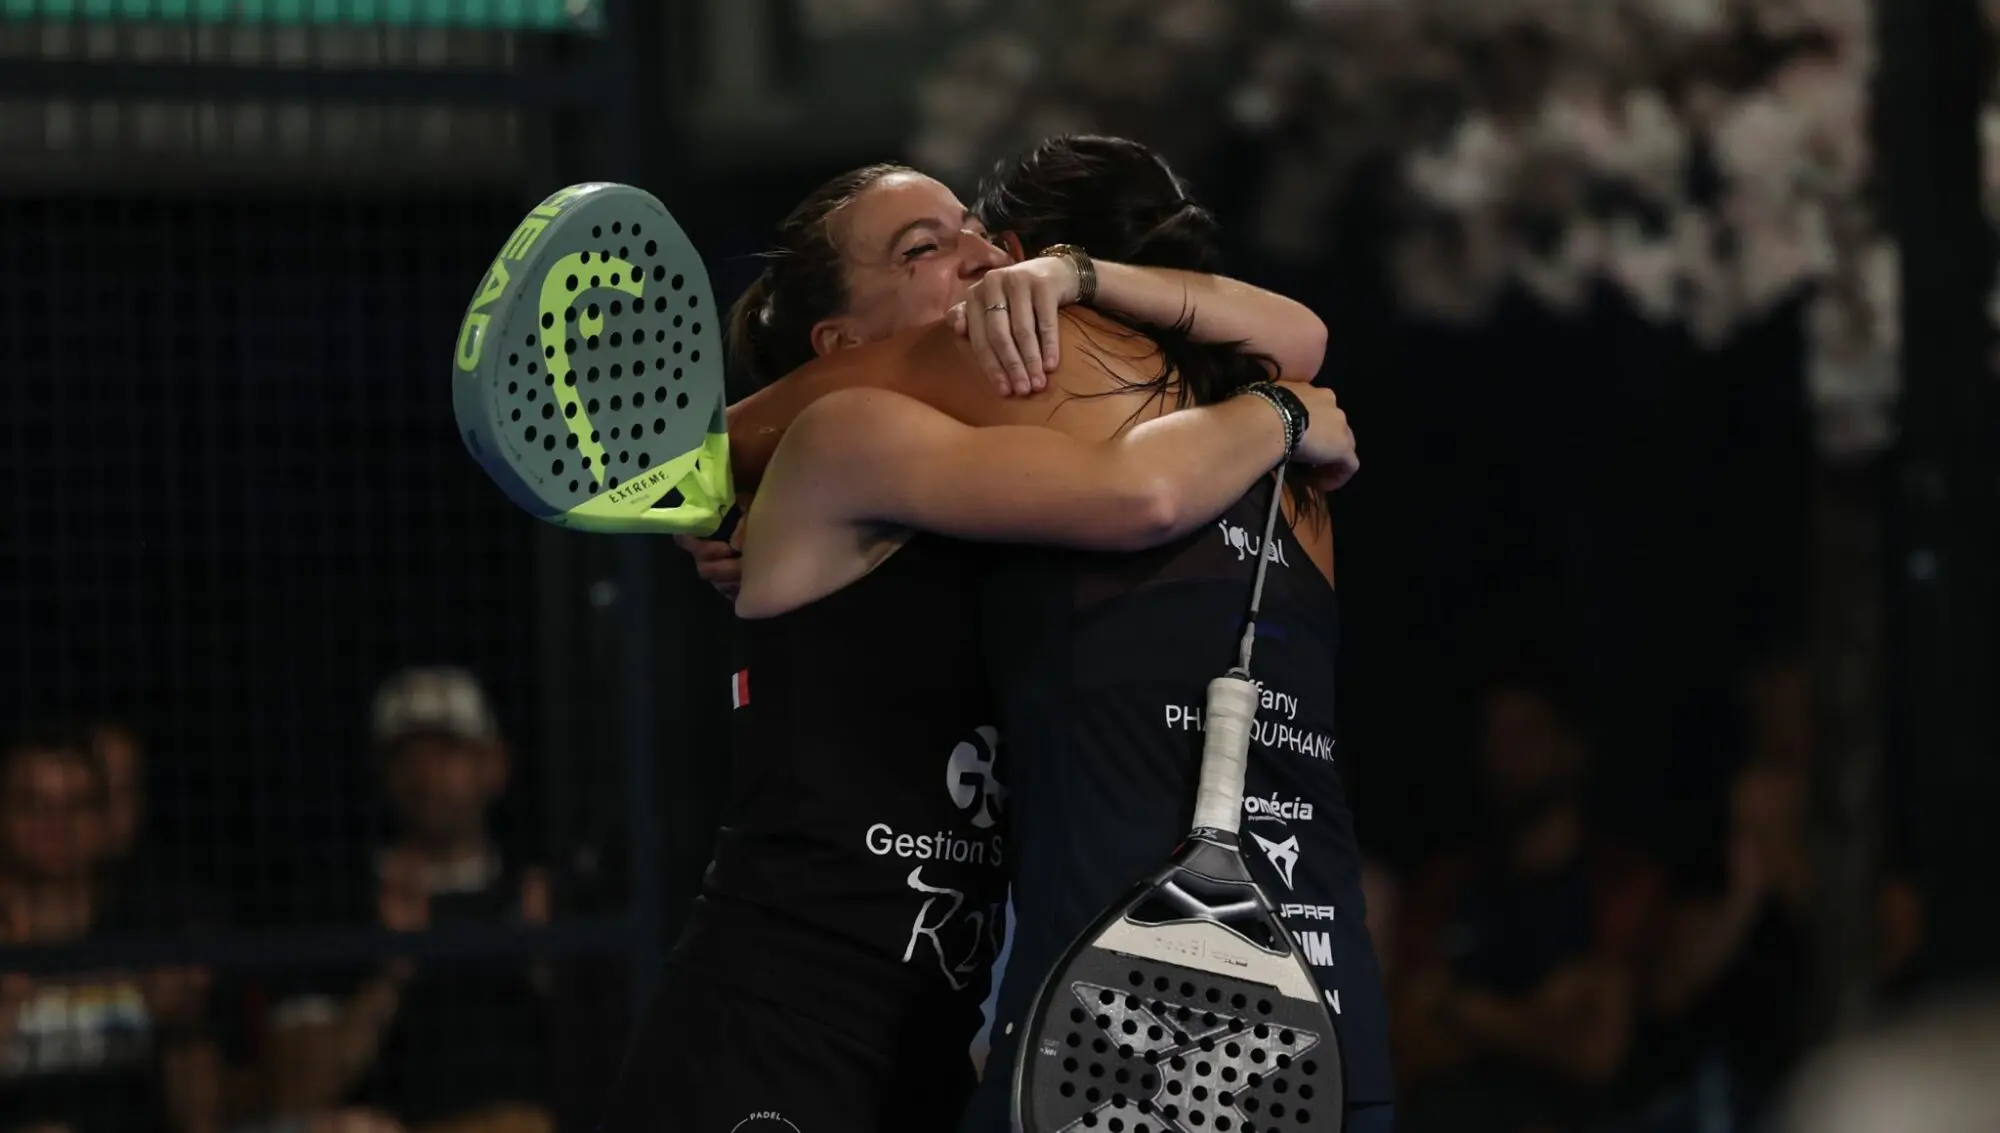 P2000 PadelShot Caen – Tiffany Phaysouphanh and Fiona Ligi win their greatest title together